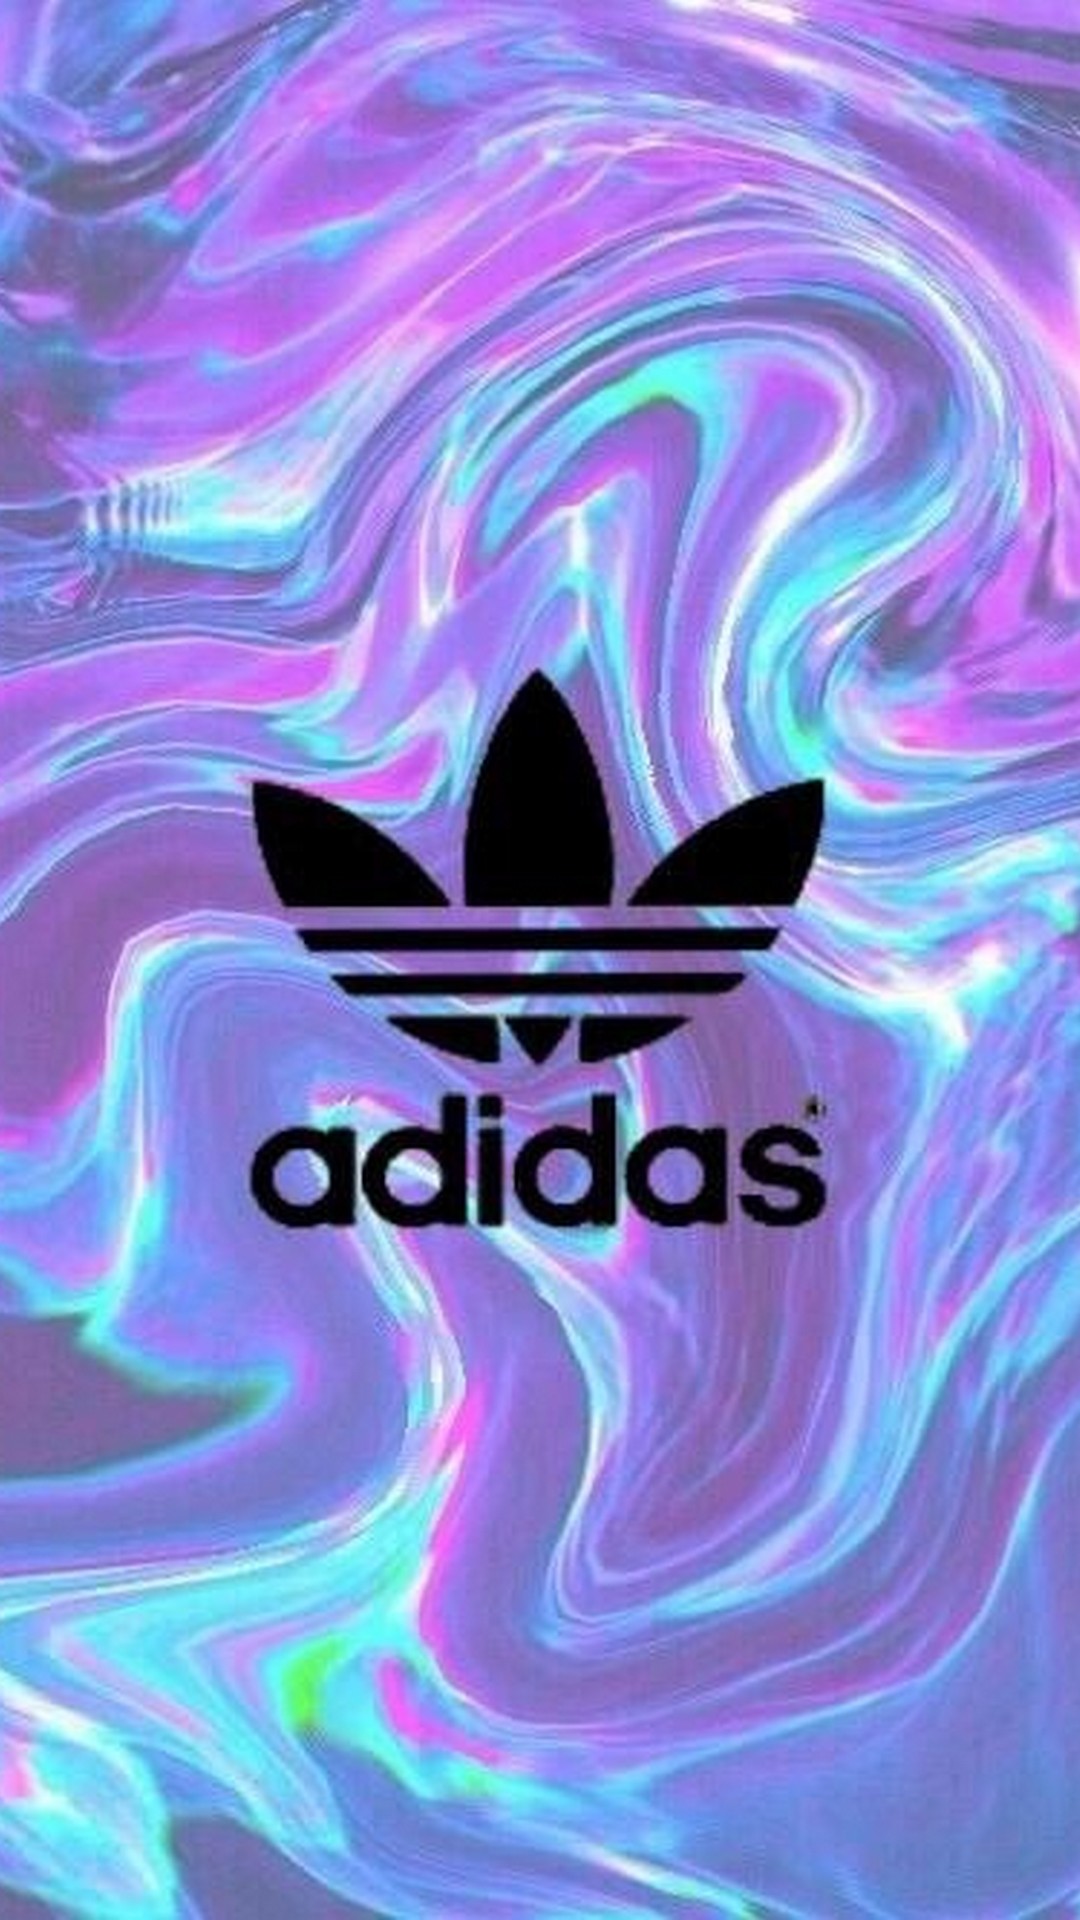 adidas background for iphone